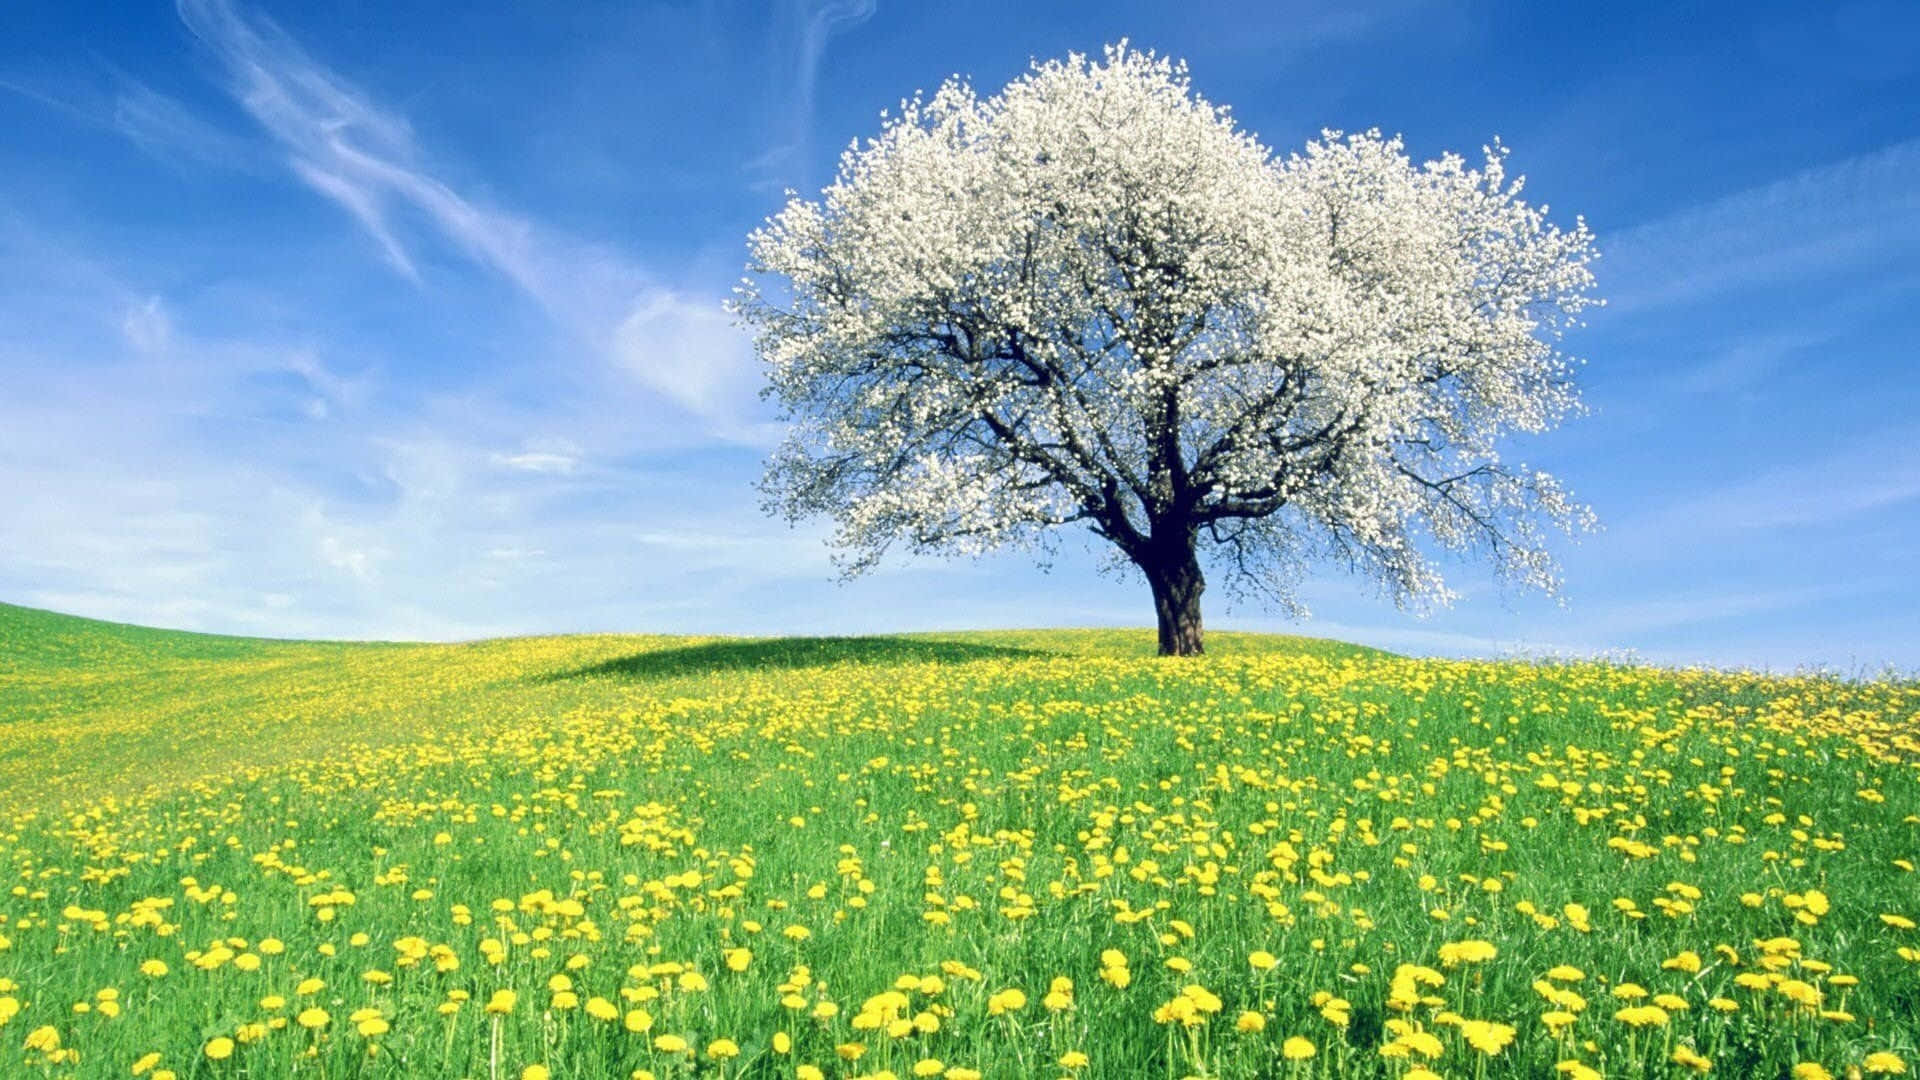 Blooming Spring Trees in a Serene Landscape Wallpaper